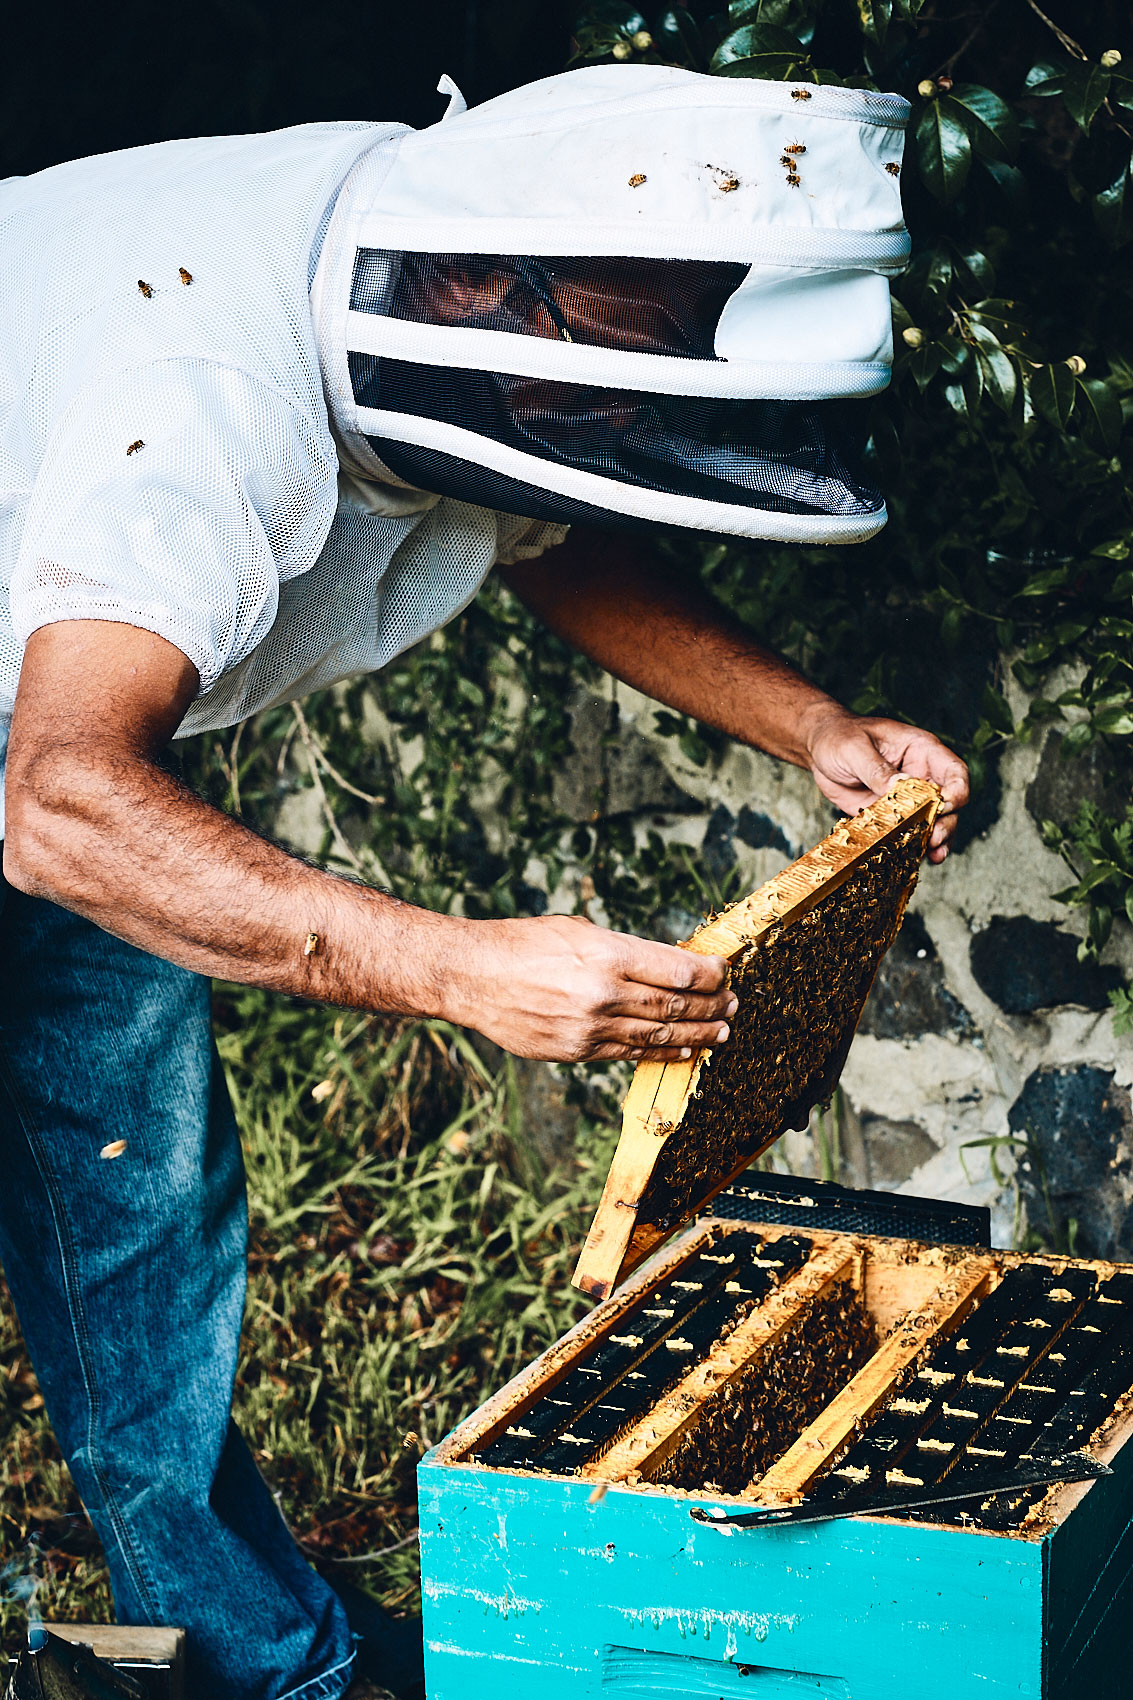 Our Beehive • Removing Layer of Honeybee Box • Lifestyle & Documentary Food Photography